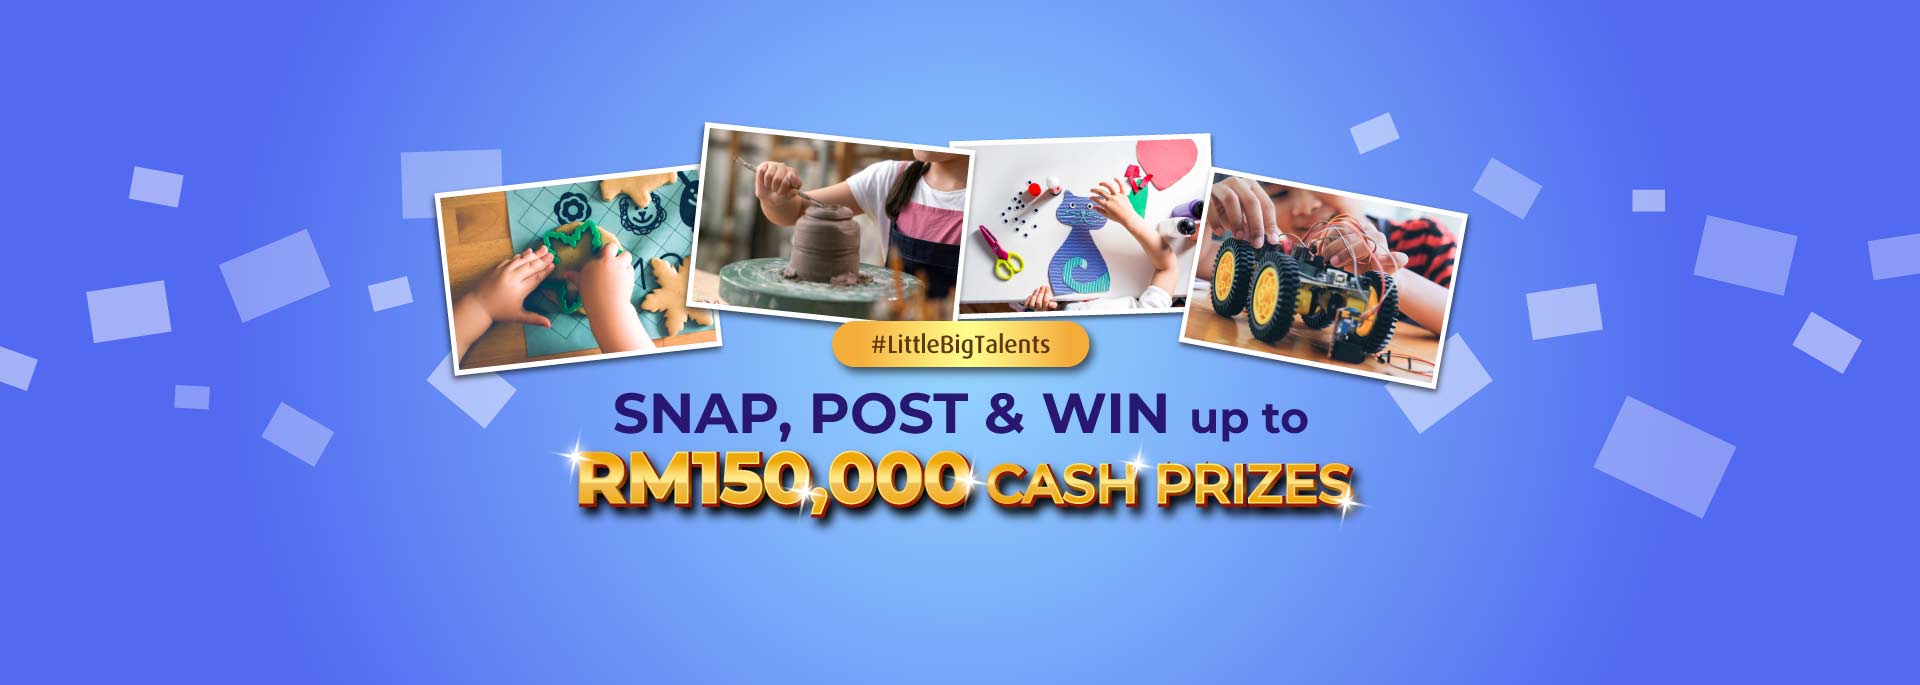 Snap, Post & Win up to RM150,000 Cash Prize